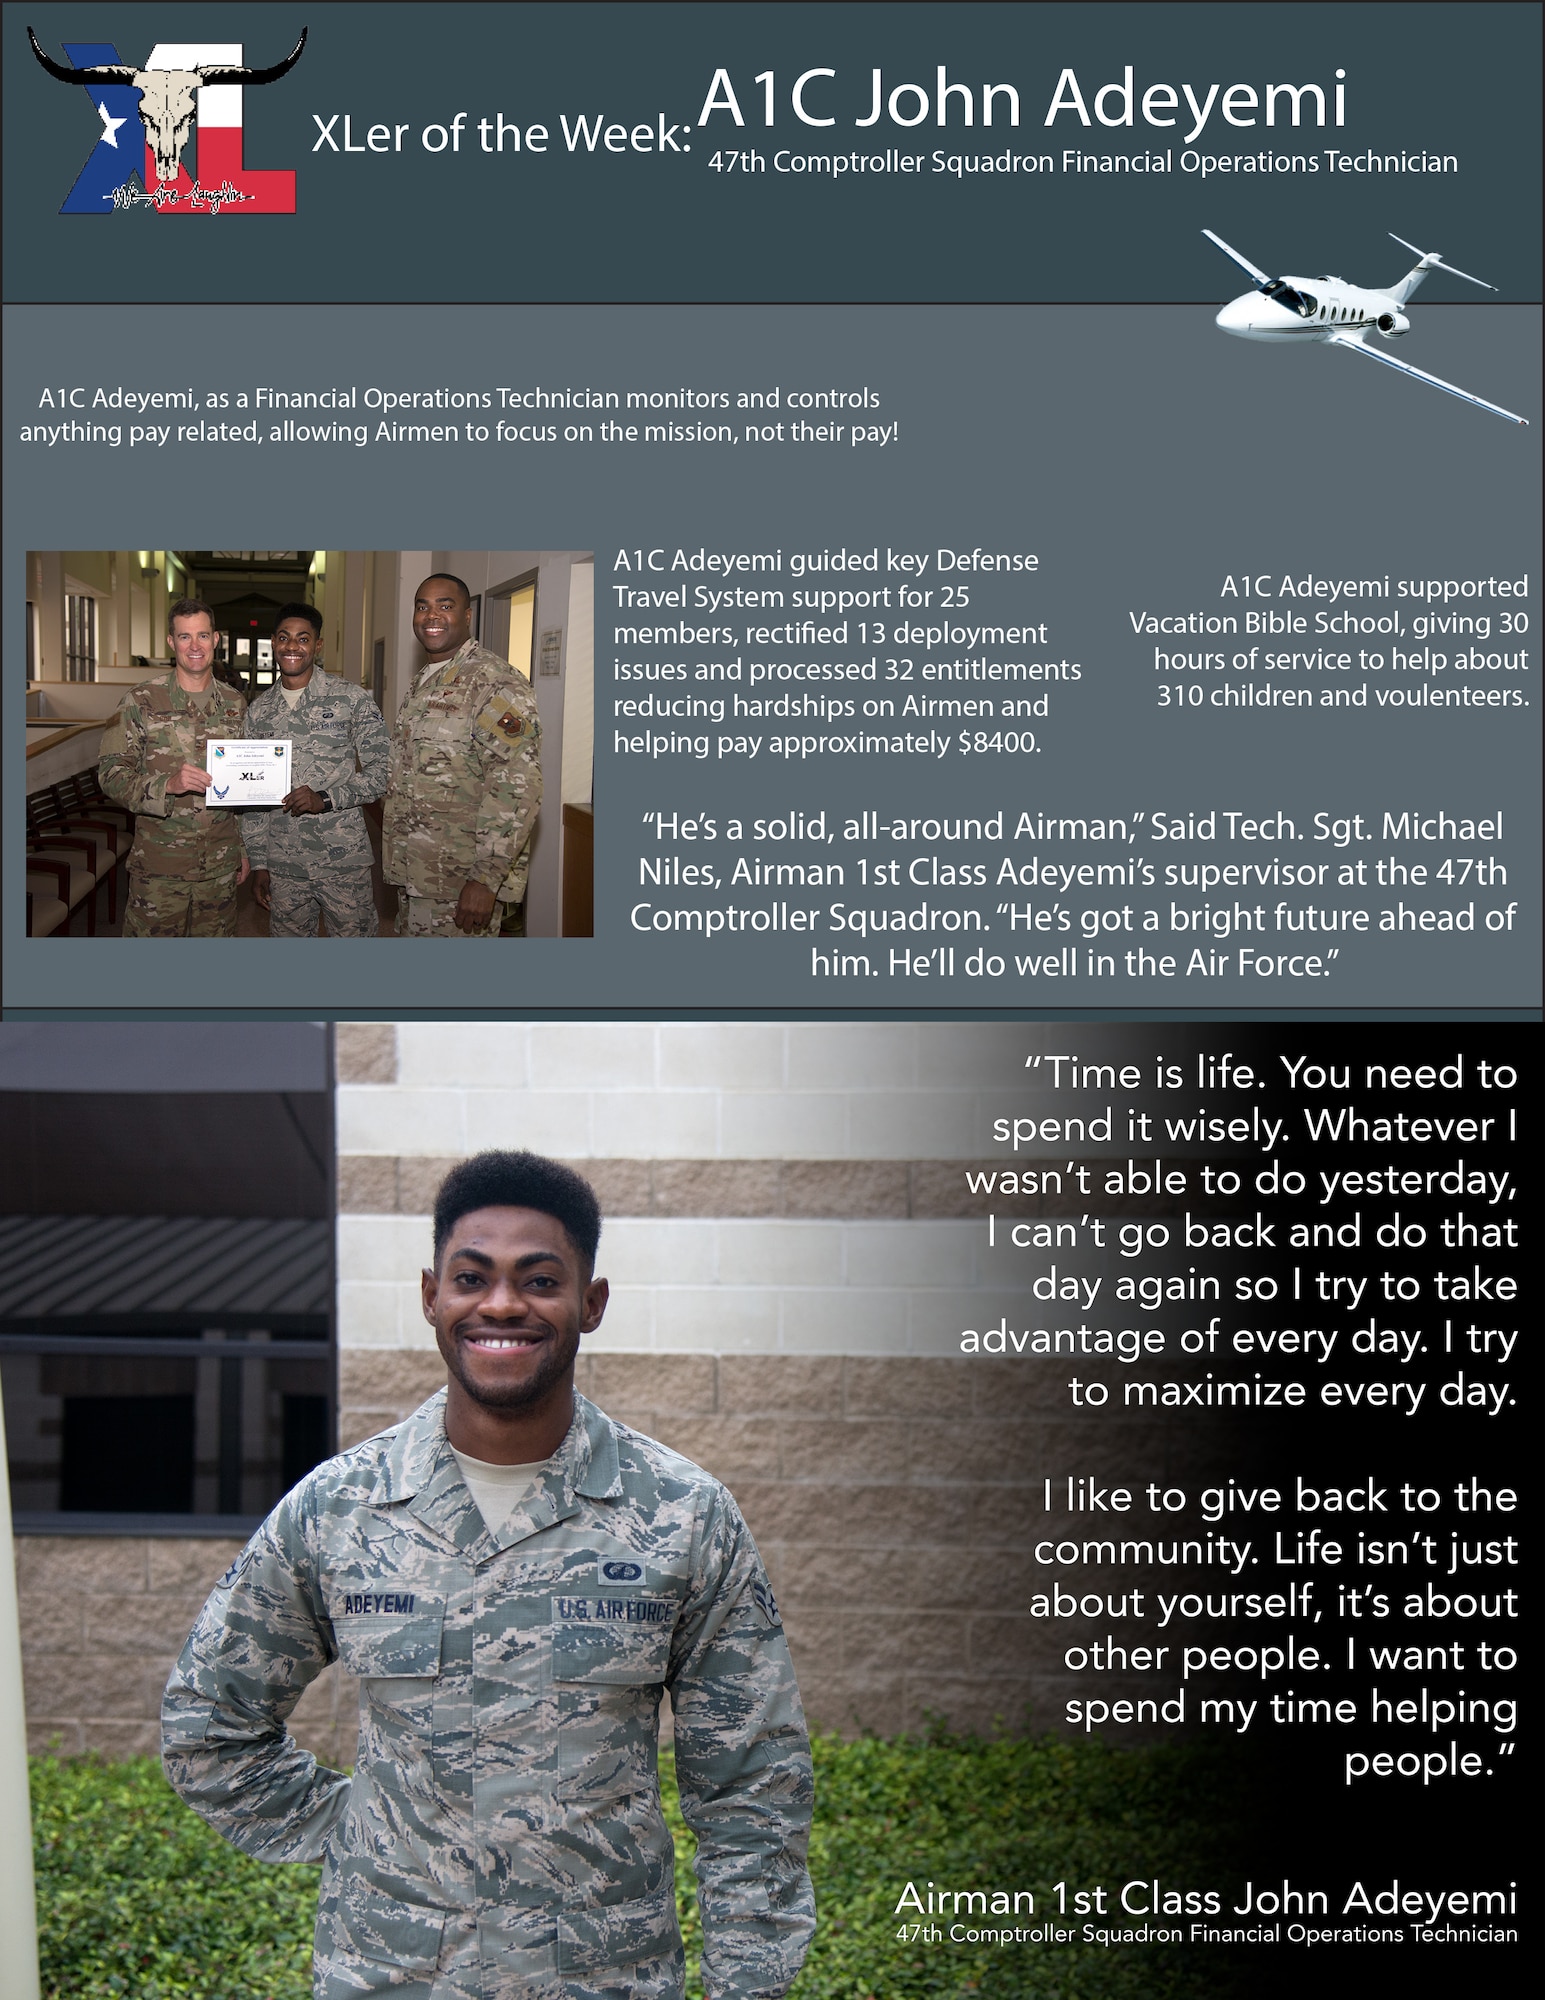 Airman 1st Class John Adeyemi, a 47th Comptroller Squadron financial operations technician, was chosen by wing leadership to be the “XLer of the Week” of Nov. 18, 2019 at Laughlin Air Force Base, Texas. Adeyemi was chosen by wing leadership to be the “XLer of the Week” of Nov. 18, 2019. (U.S. Air Force graphic by Senior Airman John A. Crawford)